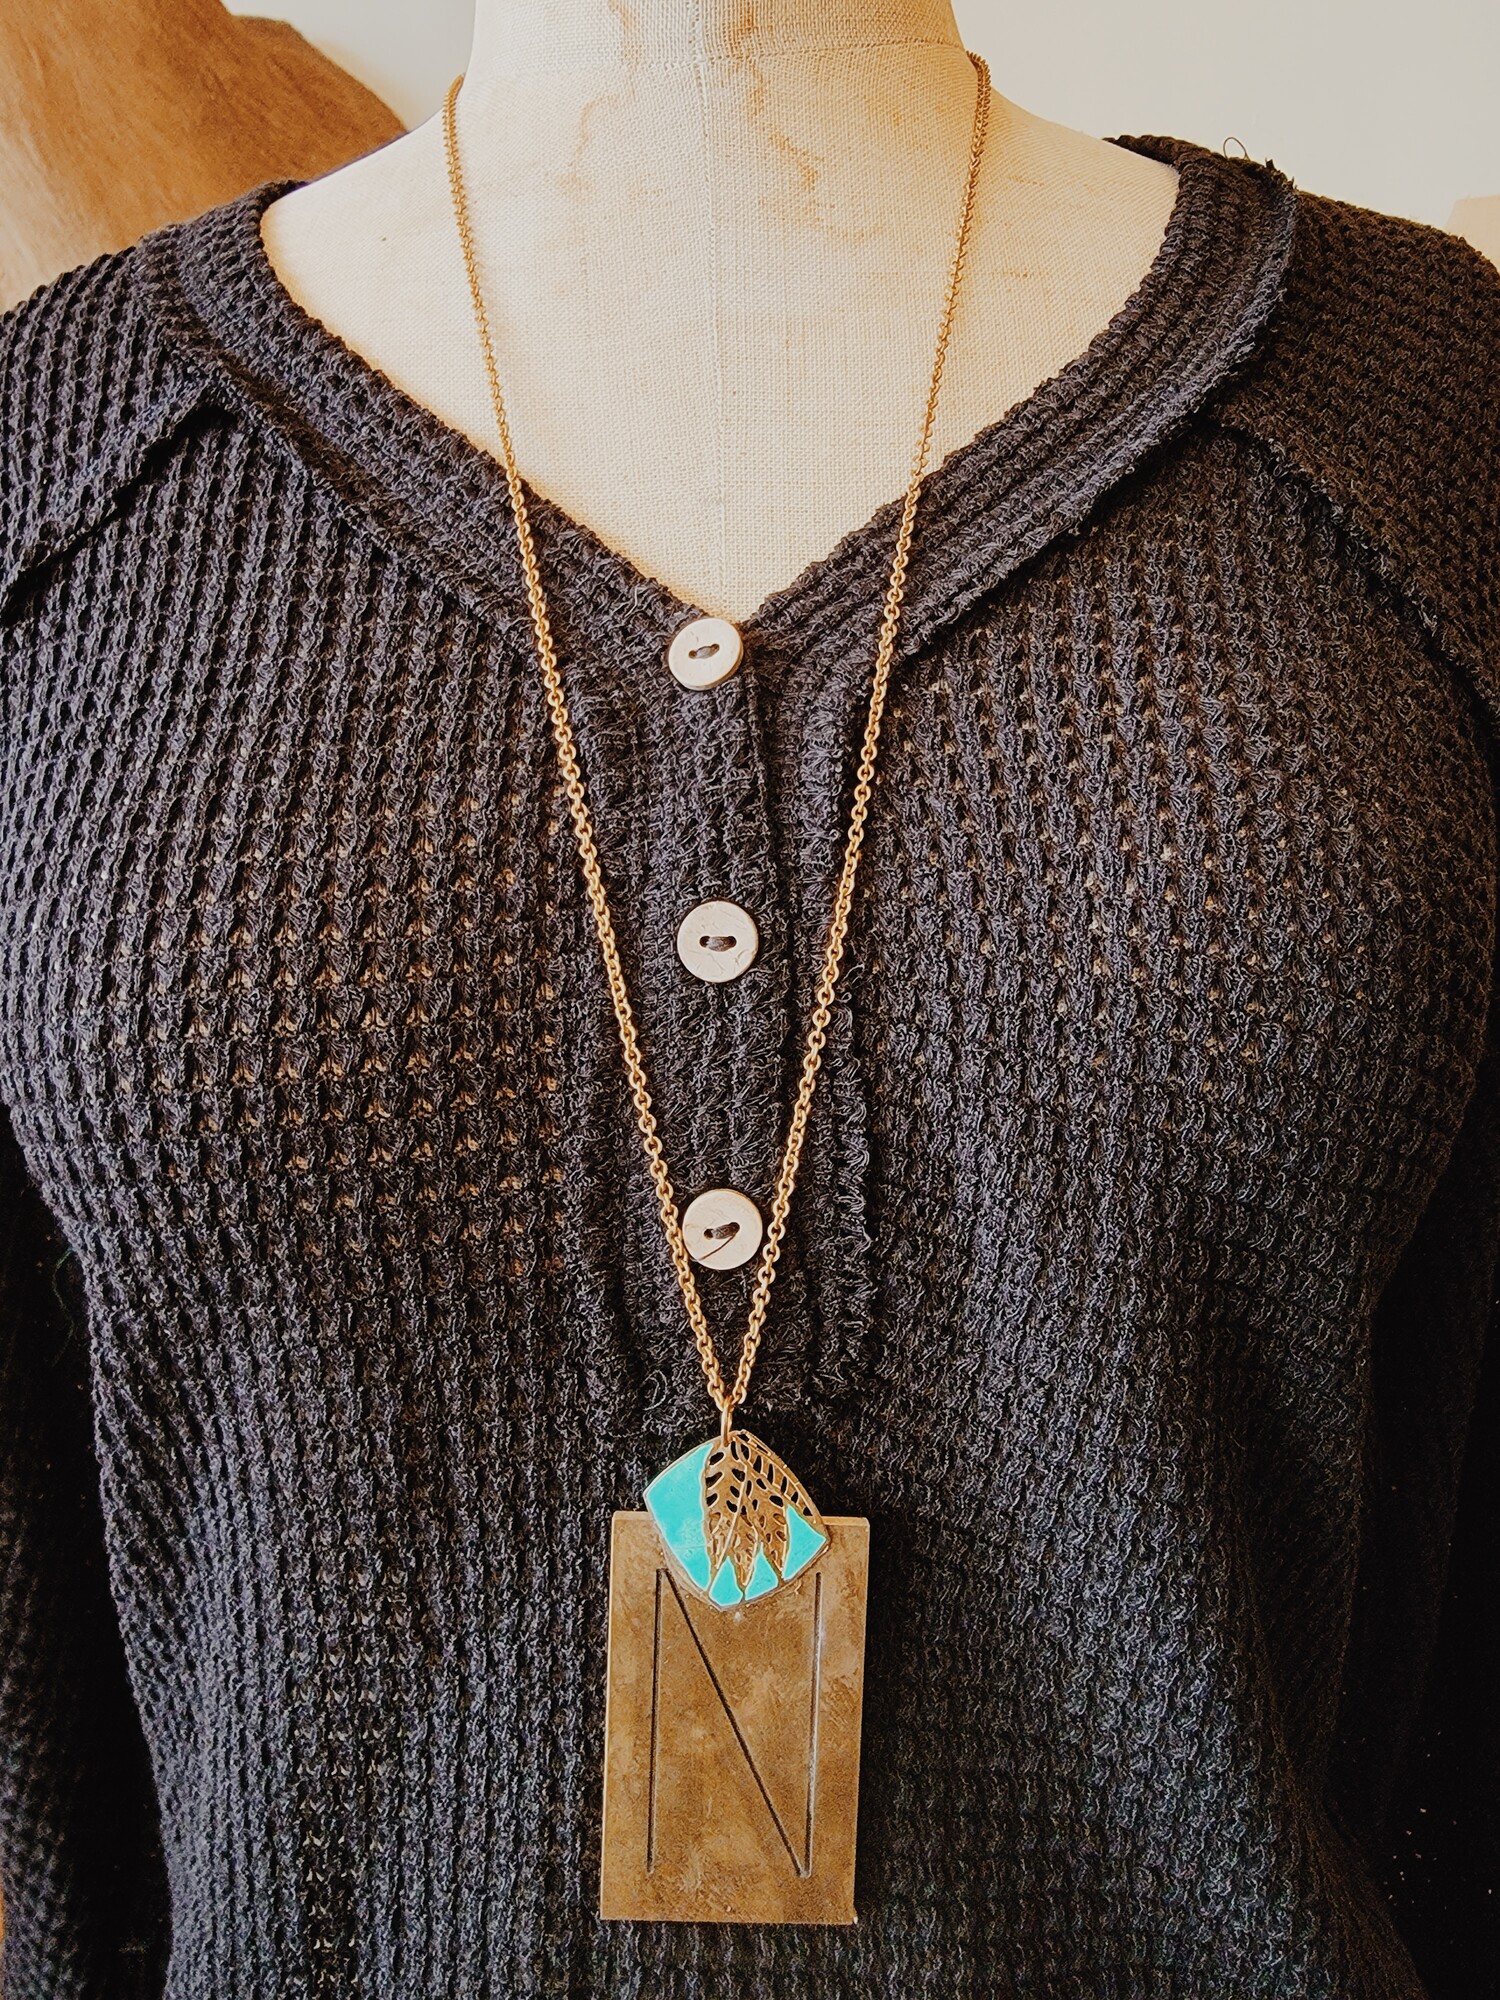 This lovely necklace has an N engraved brass plate and a touch of turquoise! It is on a 32 inch chain.